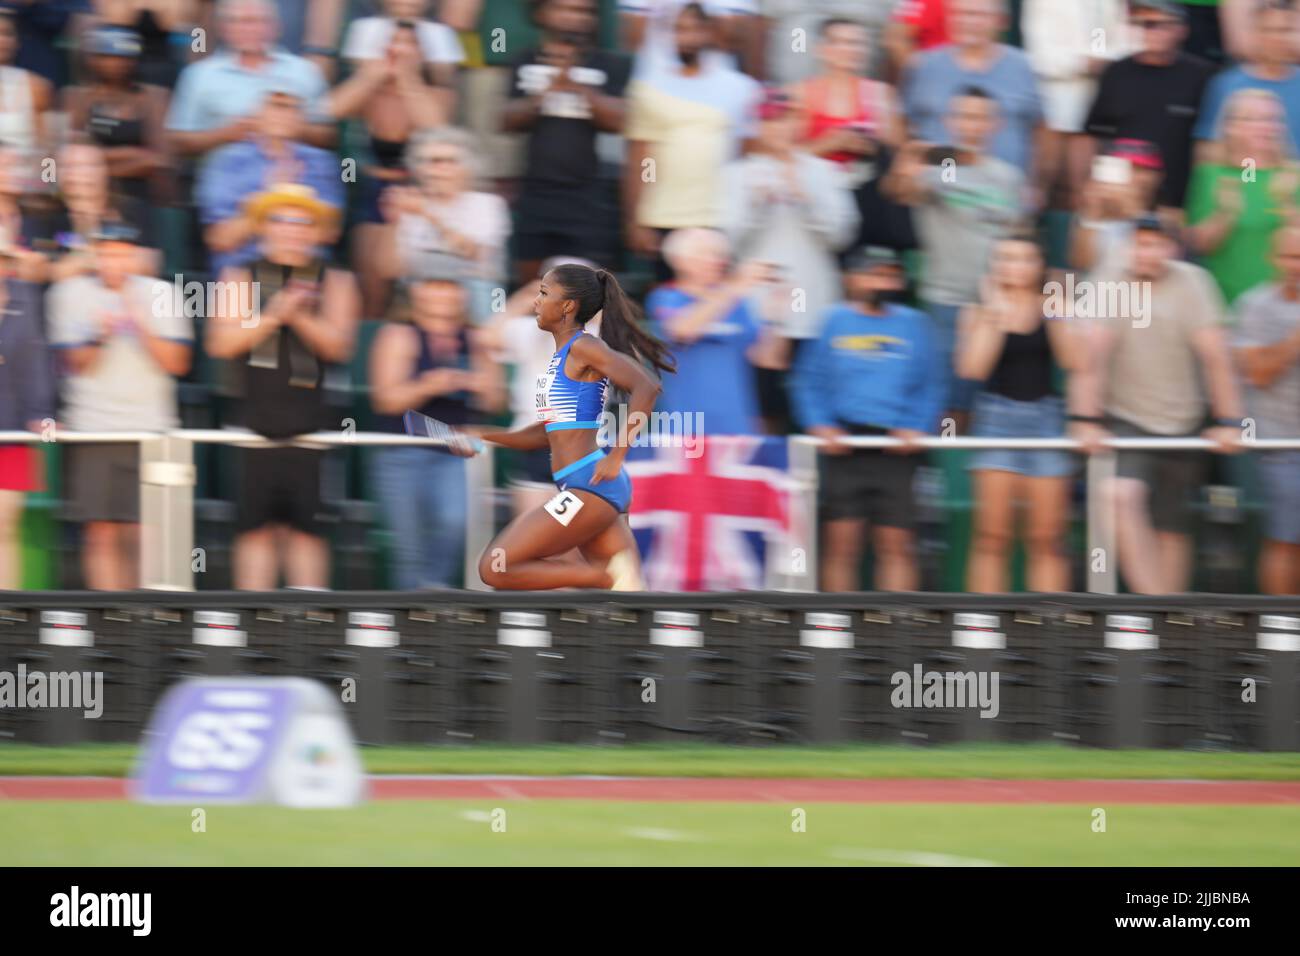 Eugene, USA. 24th July, 2022. Britton Wilson of team USA sprints during the women's 4x400m relay final at the World Athletics Championships Oregon22 in Eugene, Oregon, the United States, July 24, 2022. Credit: Wu Xiaoling/Xinhua/Alamy Live News Stock Photo